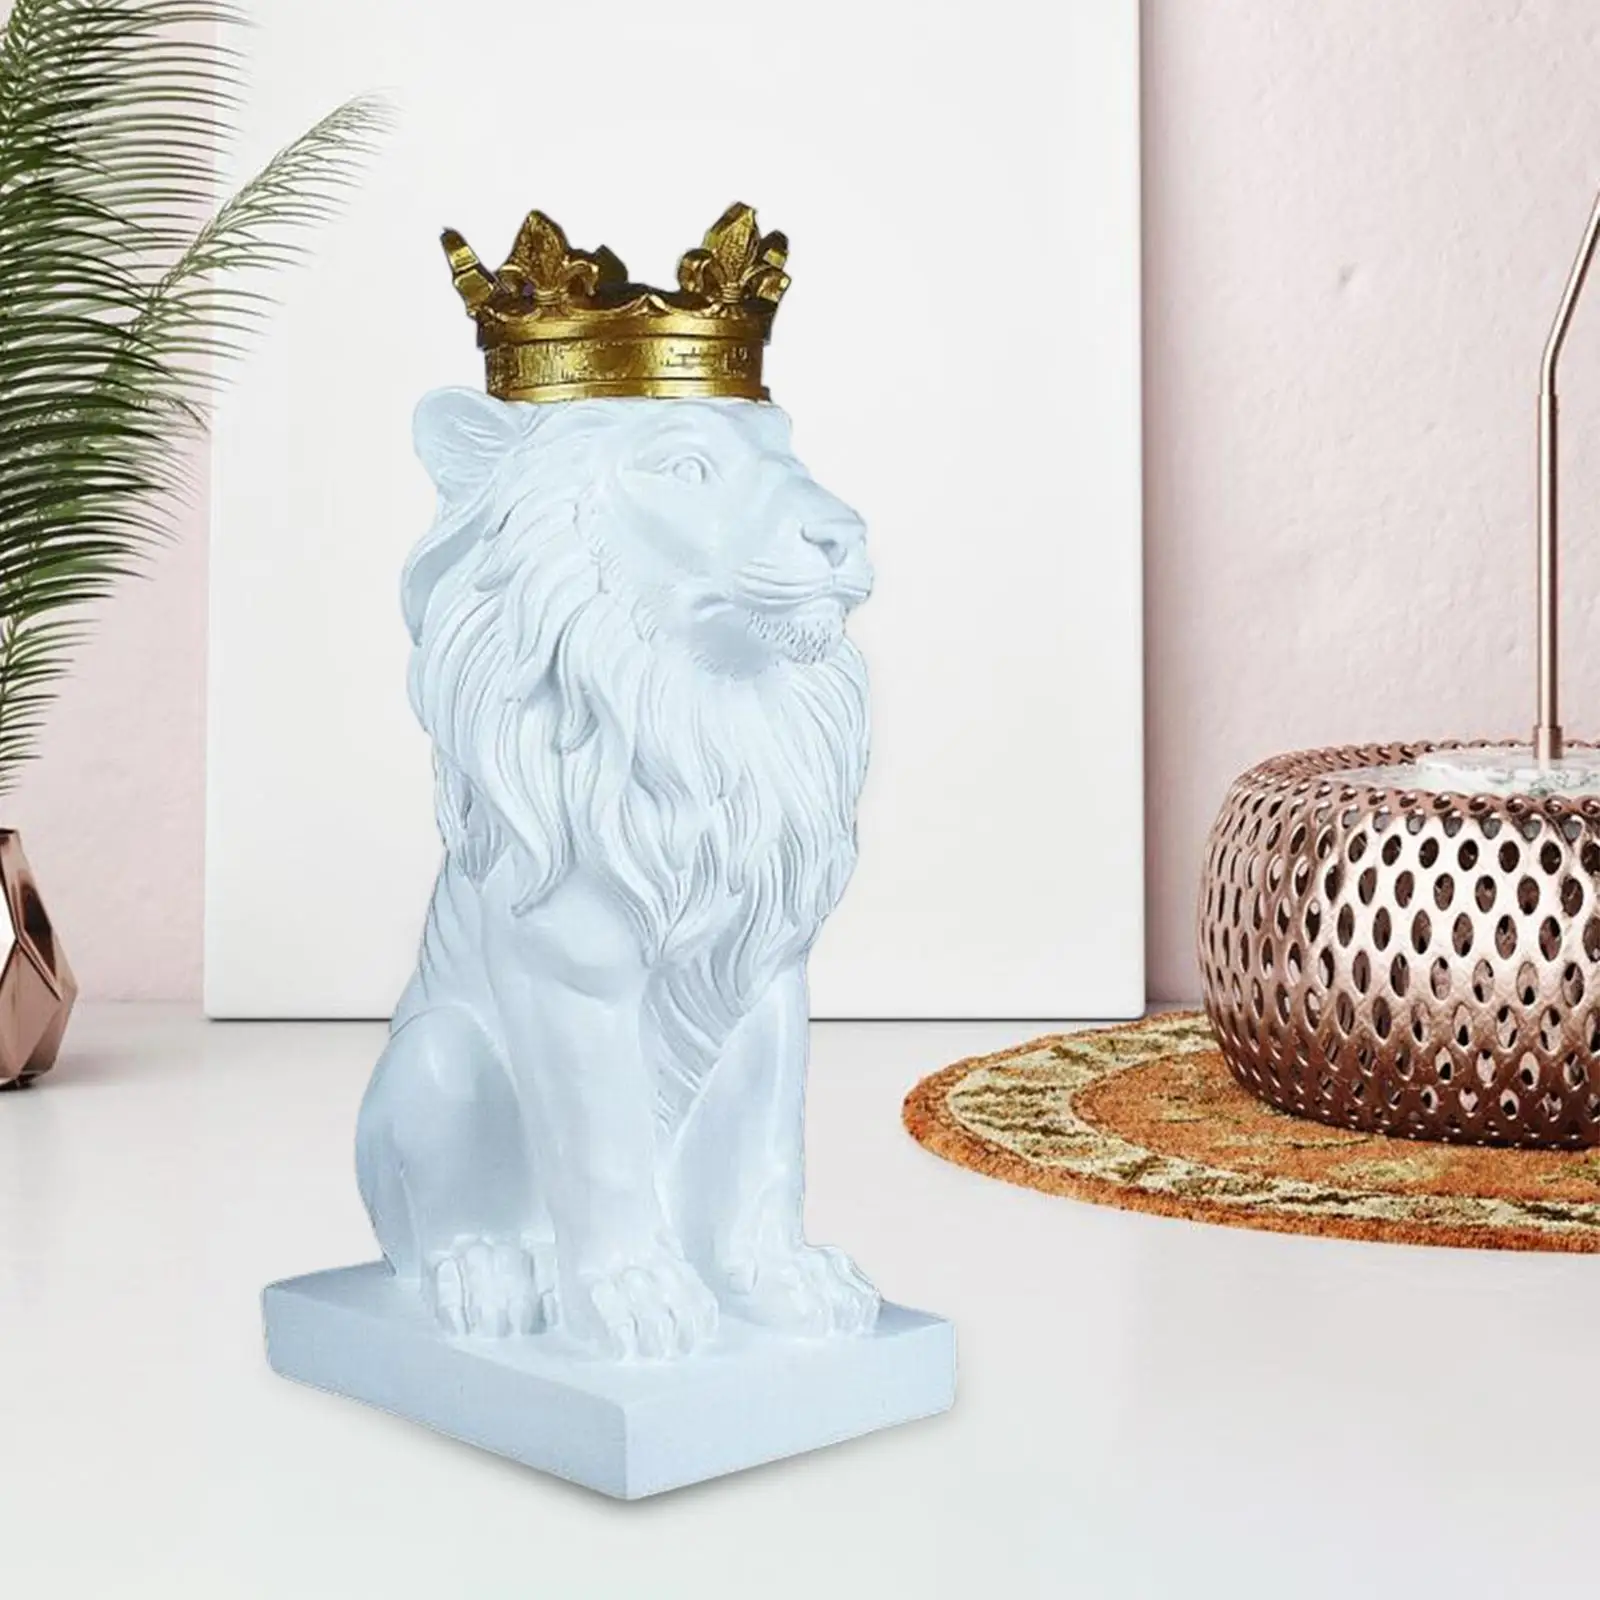 Nordic Style Lion Head Statue Animal Figurine Ornament for Office Tabletop